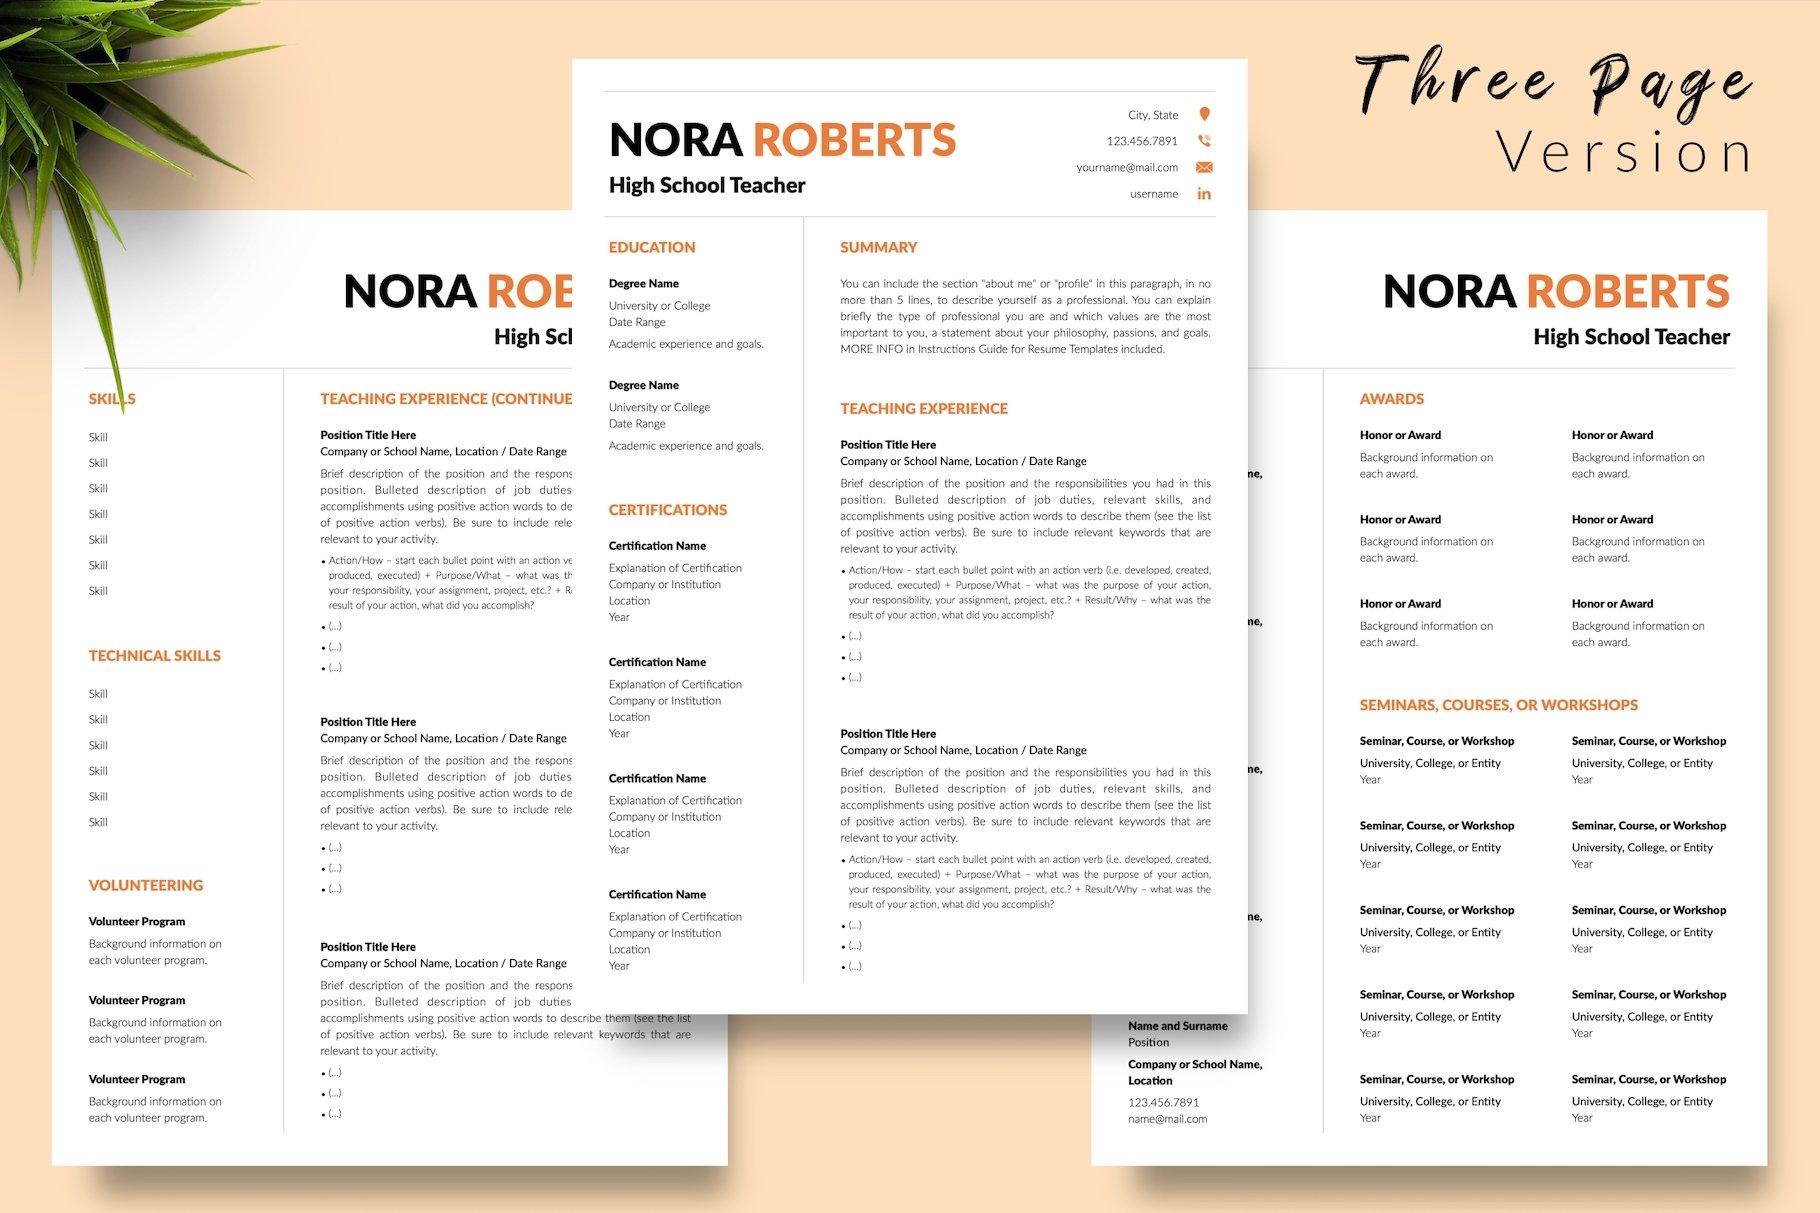 resume cv template nora roberts for creative market 04 three page version 400